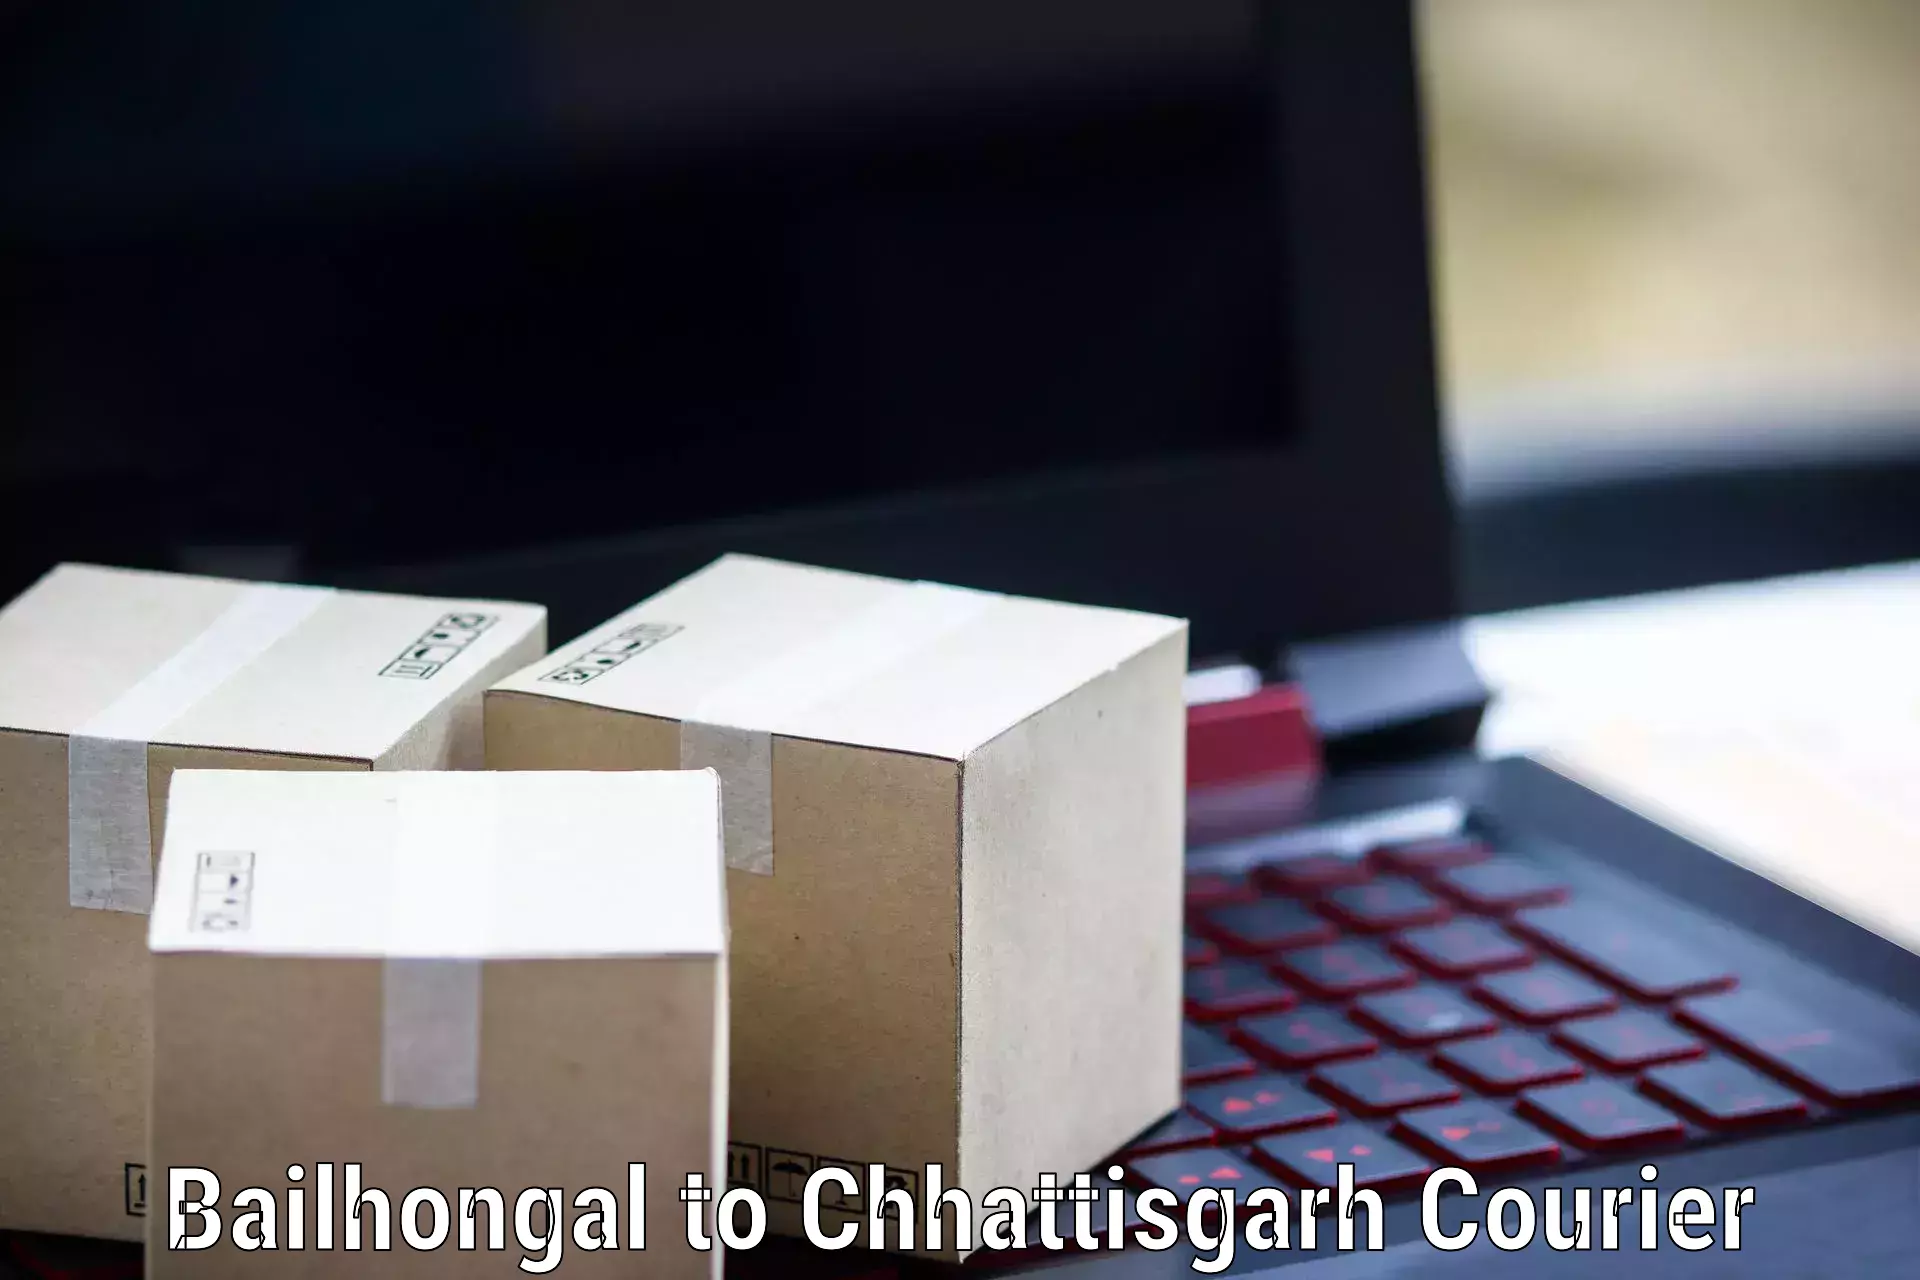 Global shipping networks in Bailhongal to Khairagarh